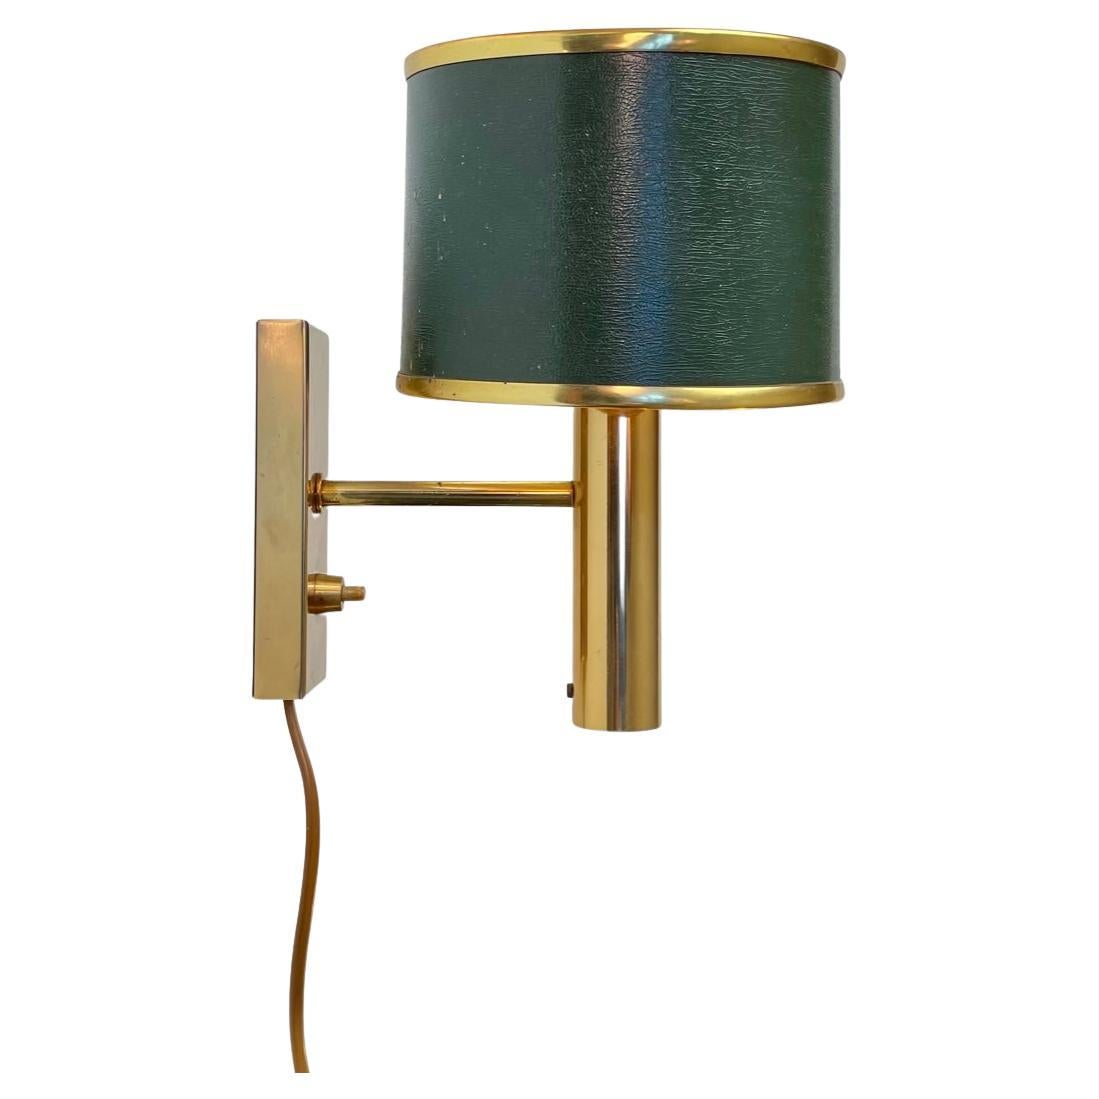 Danish Modern Green Wall Sconce in Brass by Fog & Mørup, 1970s For Sale